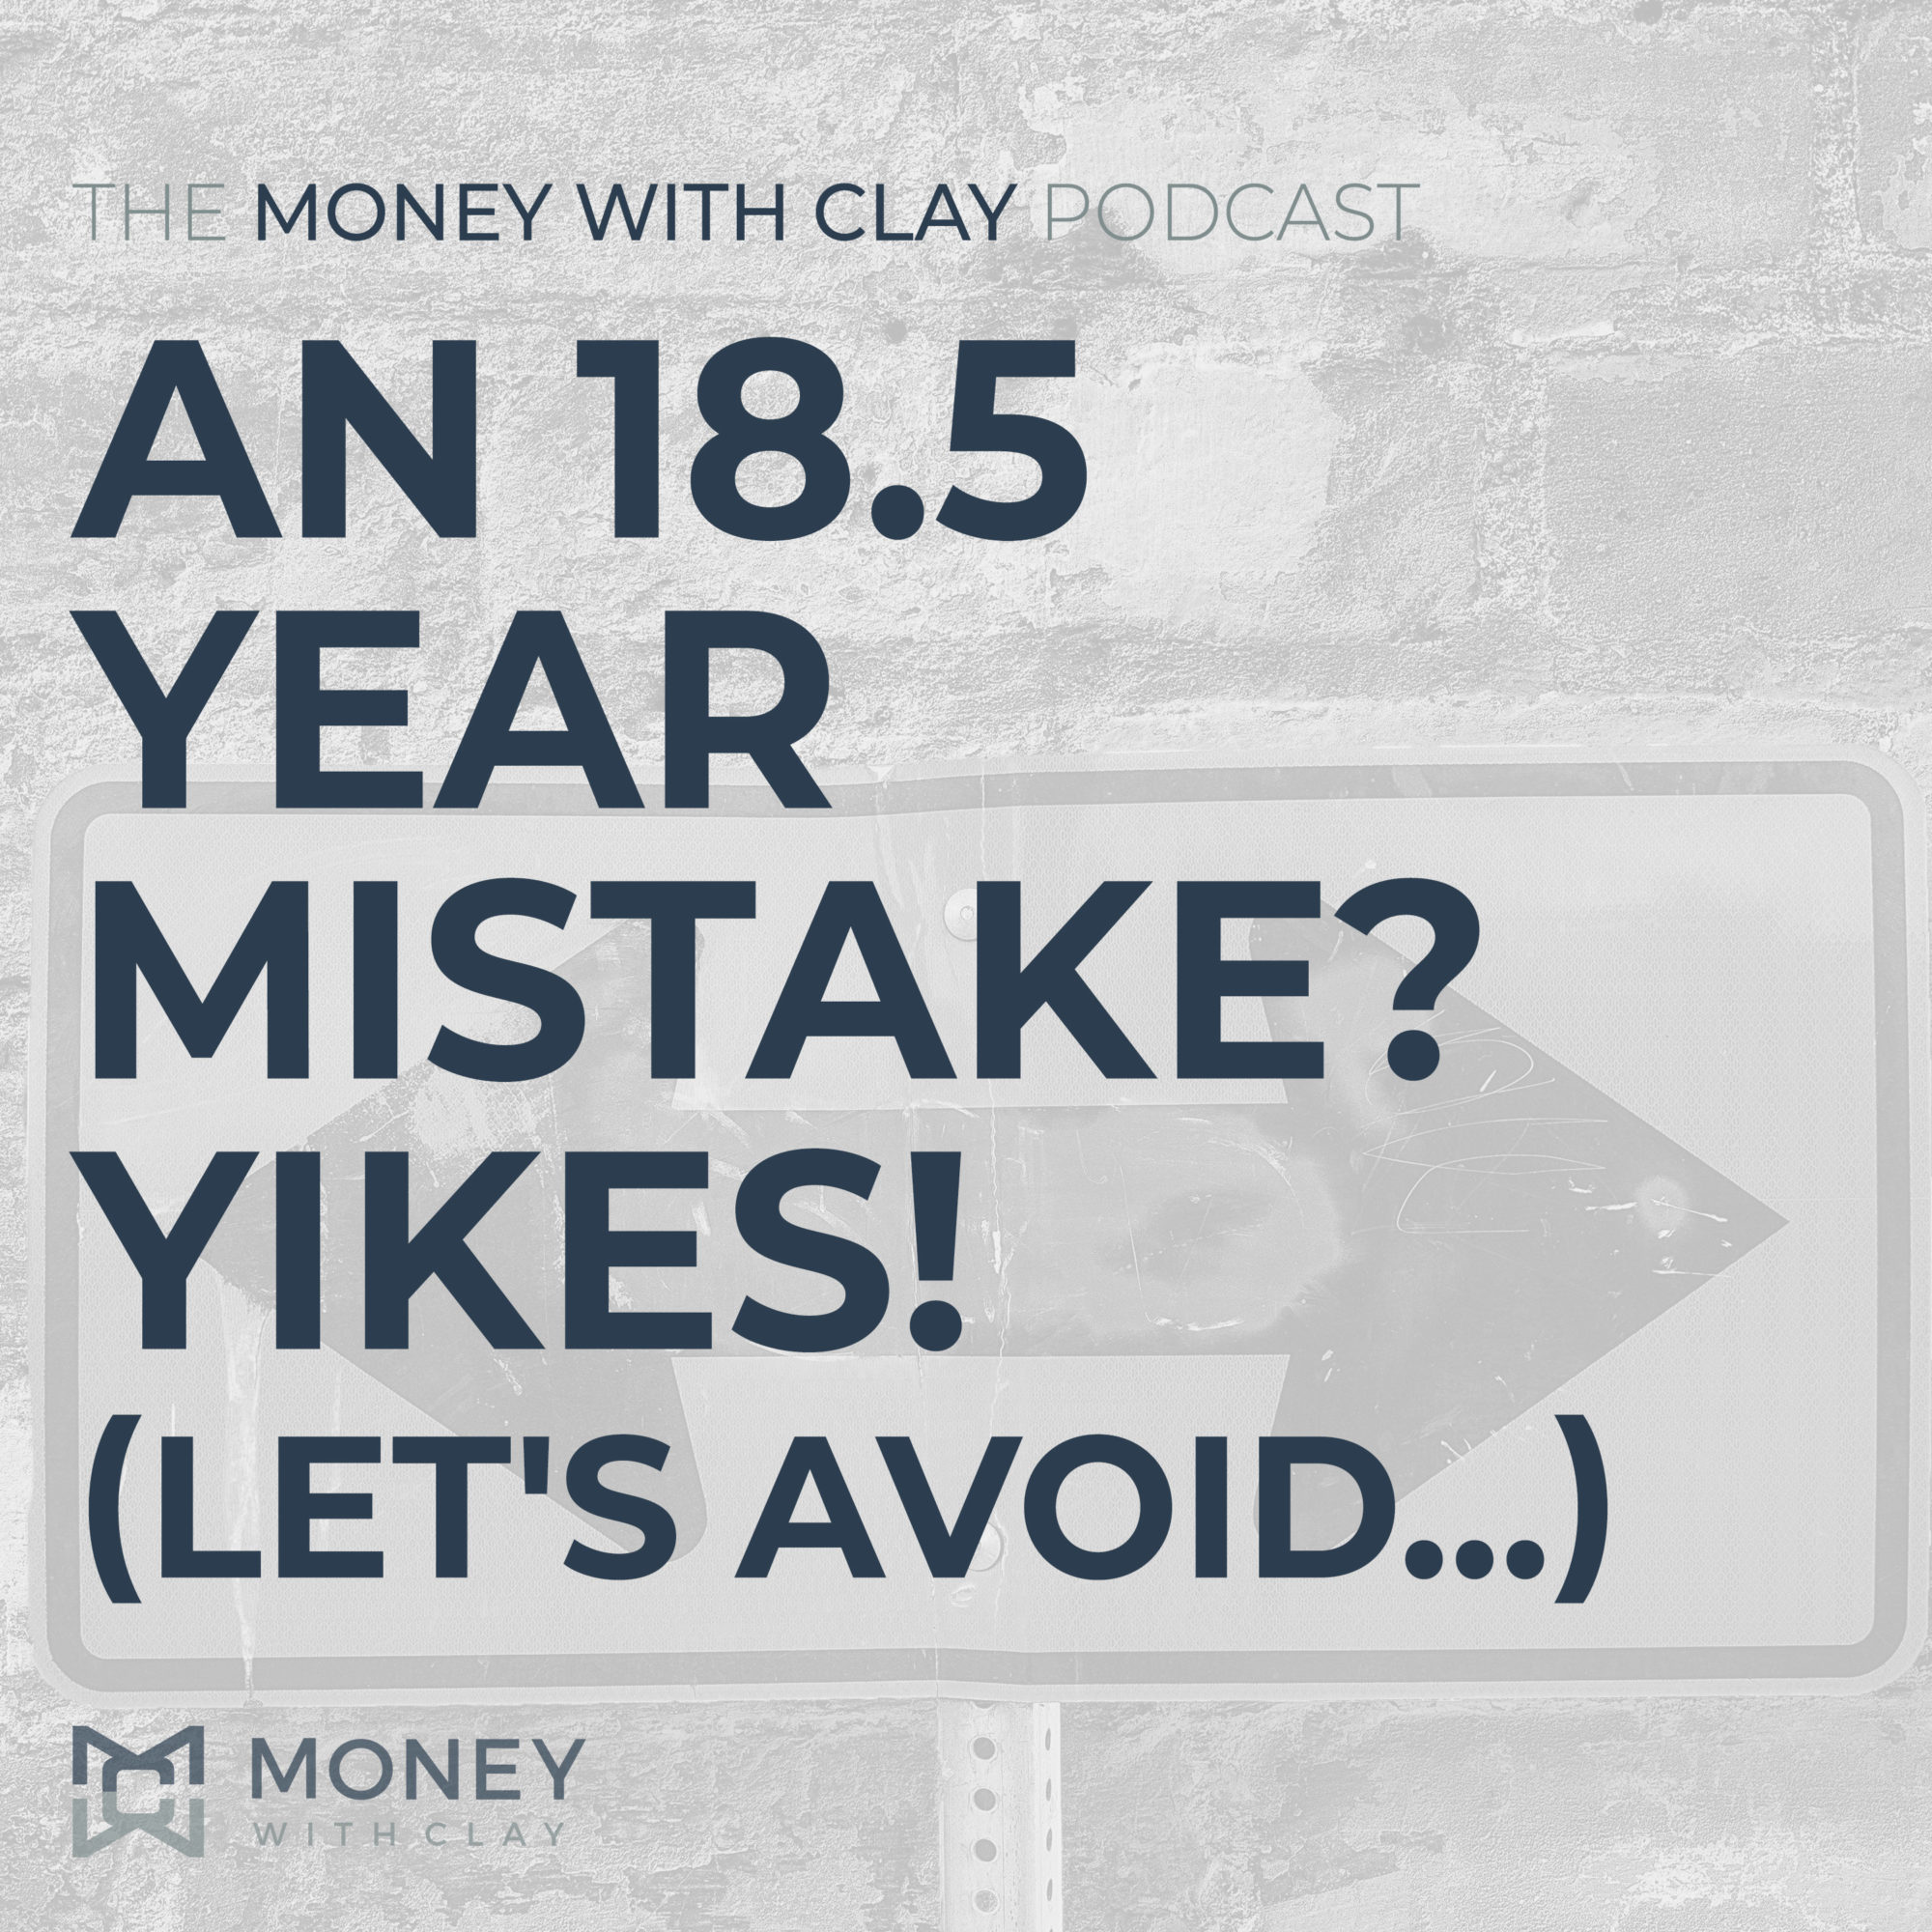 #077 - An 18.5 Year Mistake? Yikes! (Let's Avoid...)